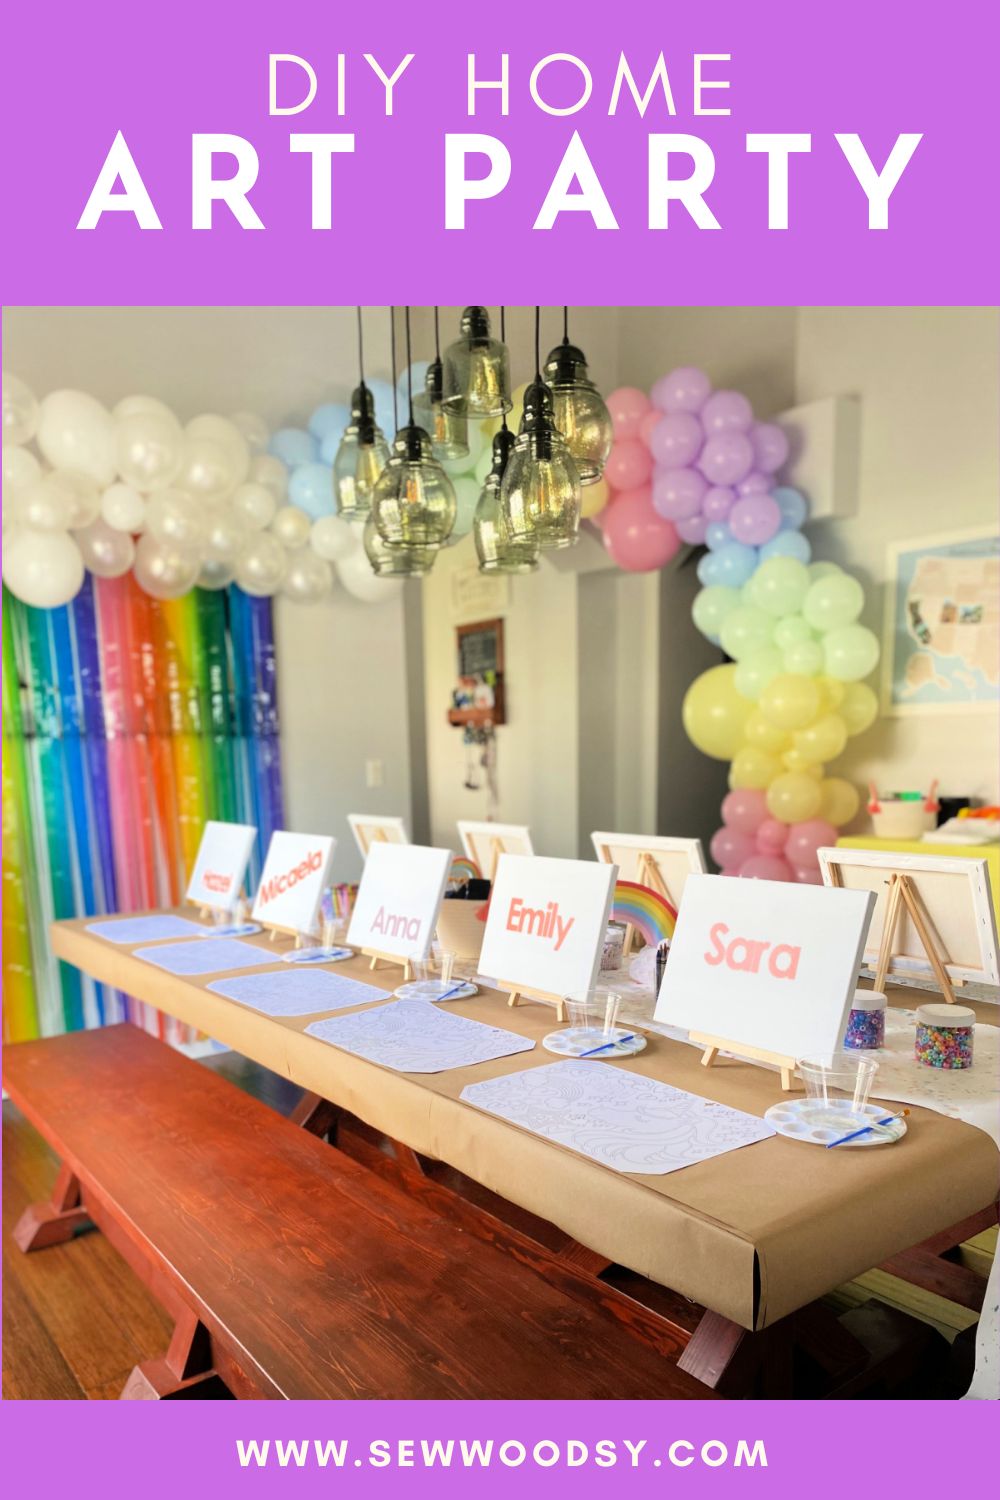 DIY Art Themed Birthday Party: Tips and Ideas for a Creative